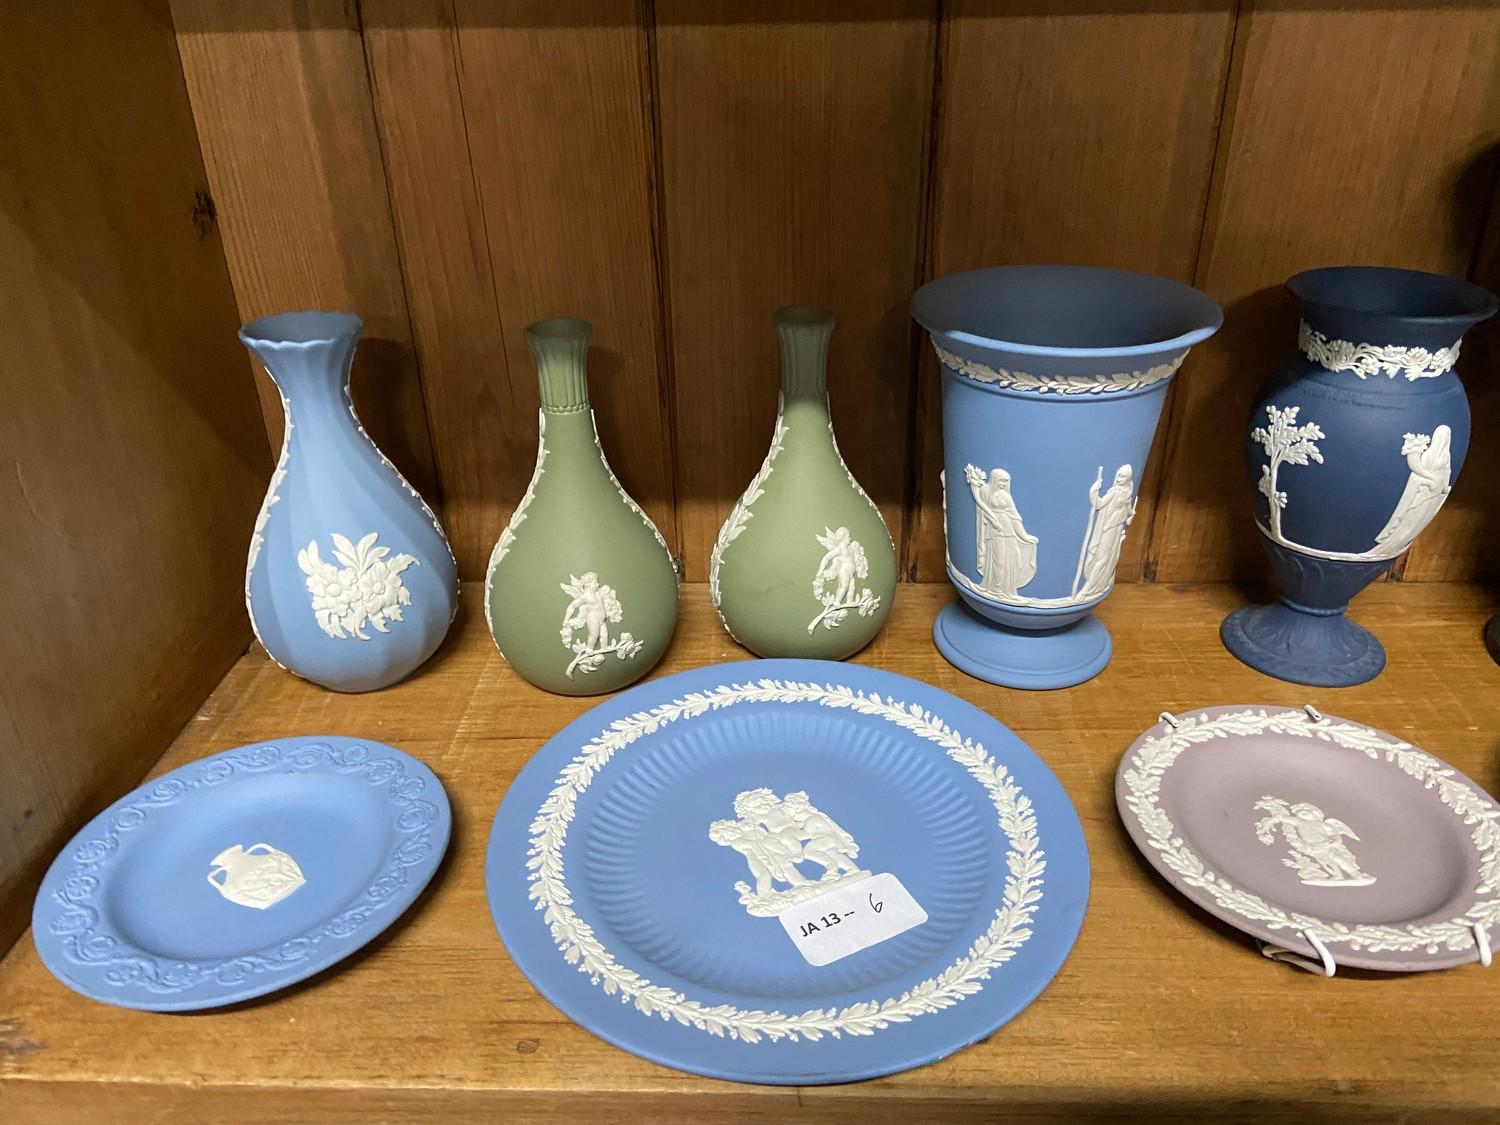 A Shelf of various Wedgwood Jasper ware vases, plates and cruets - Image 2 of 4